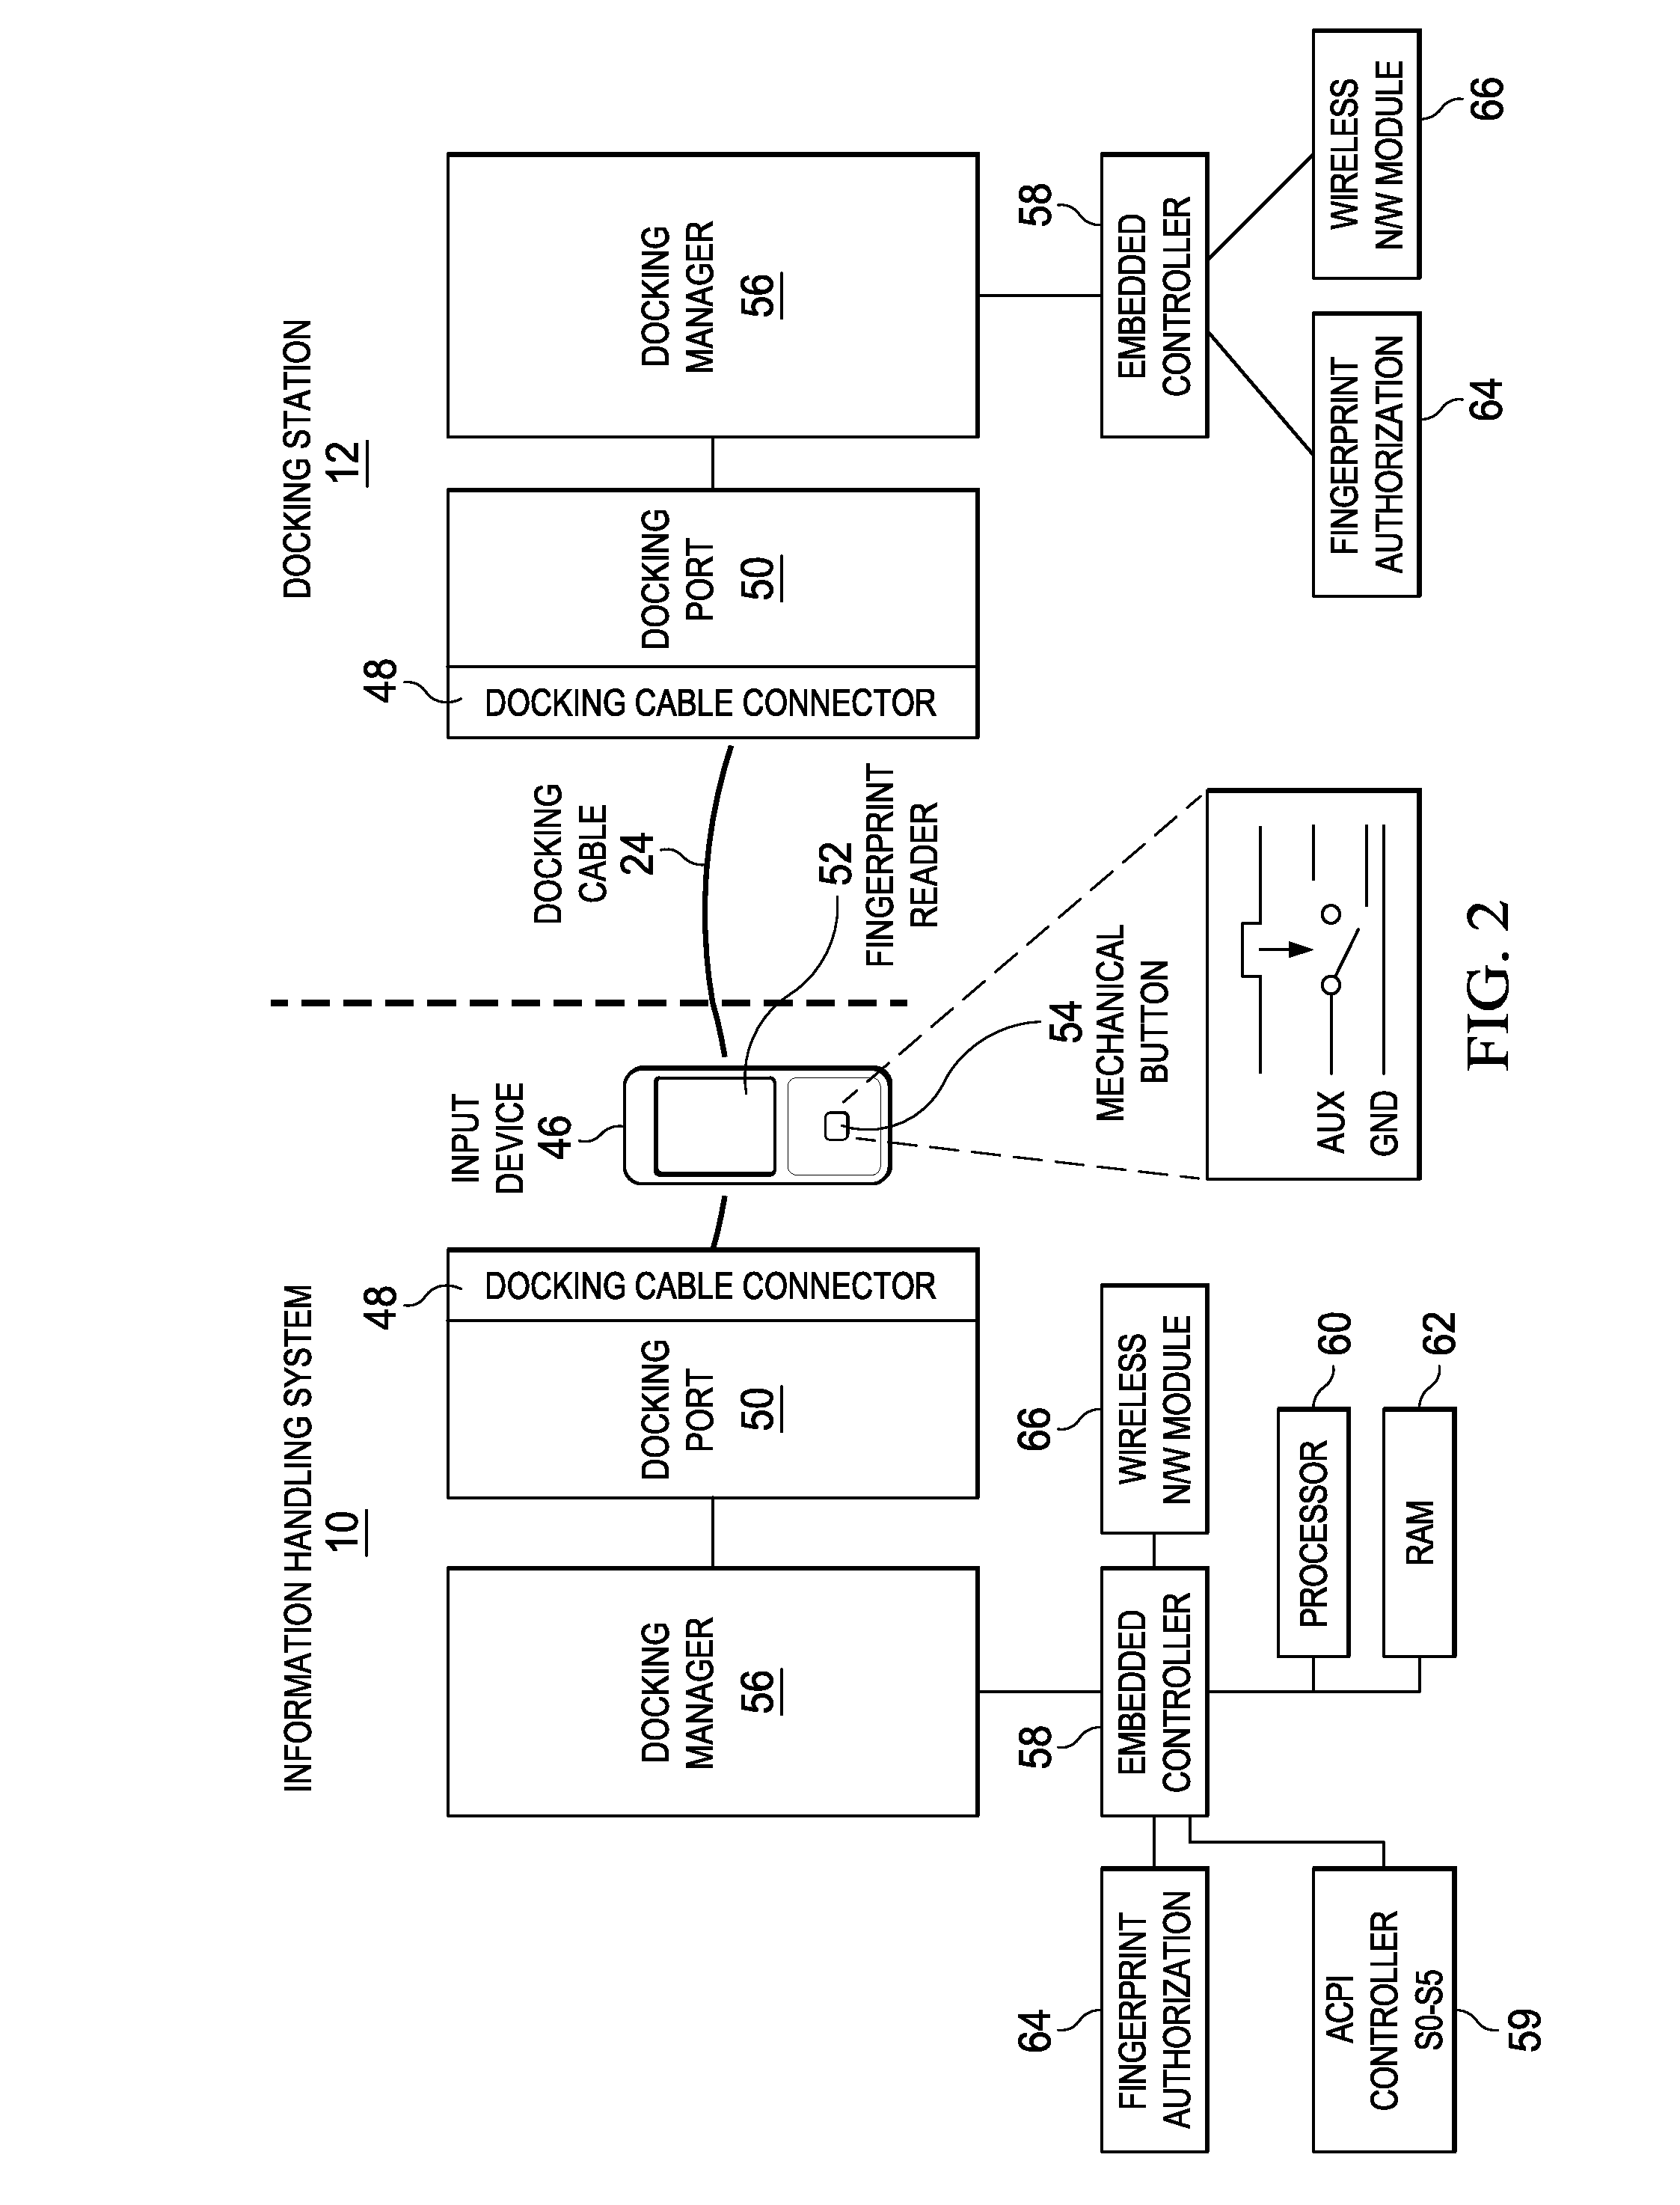 Information Handling System Docking with Cable Based Power and Video Management